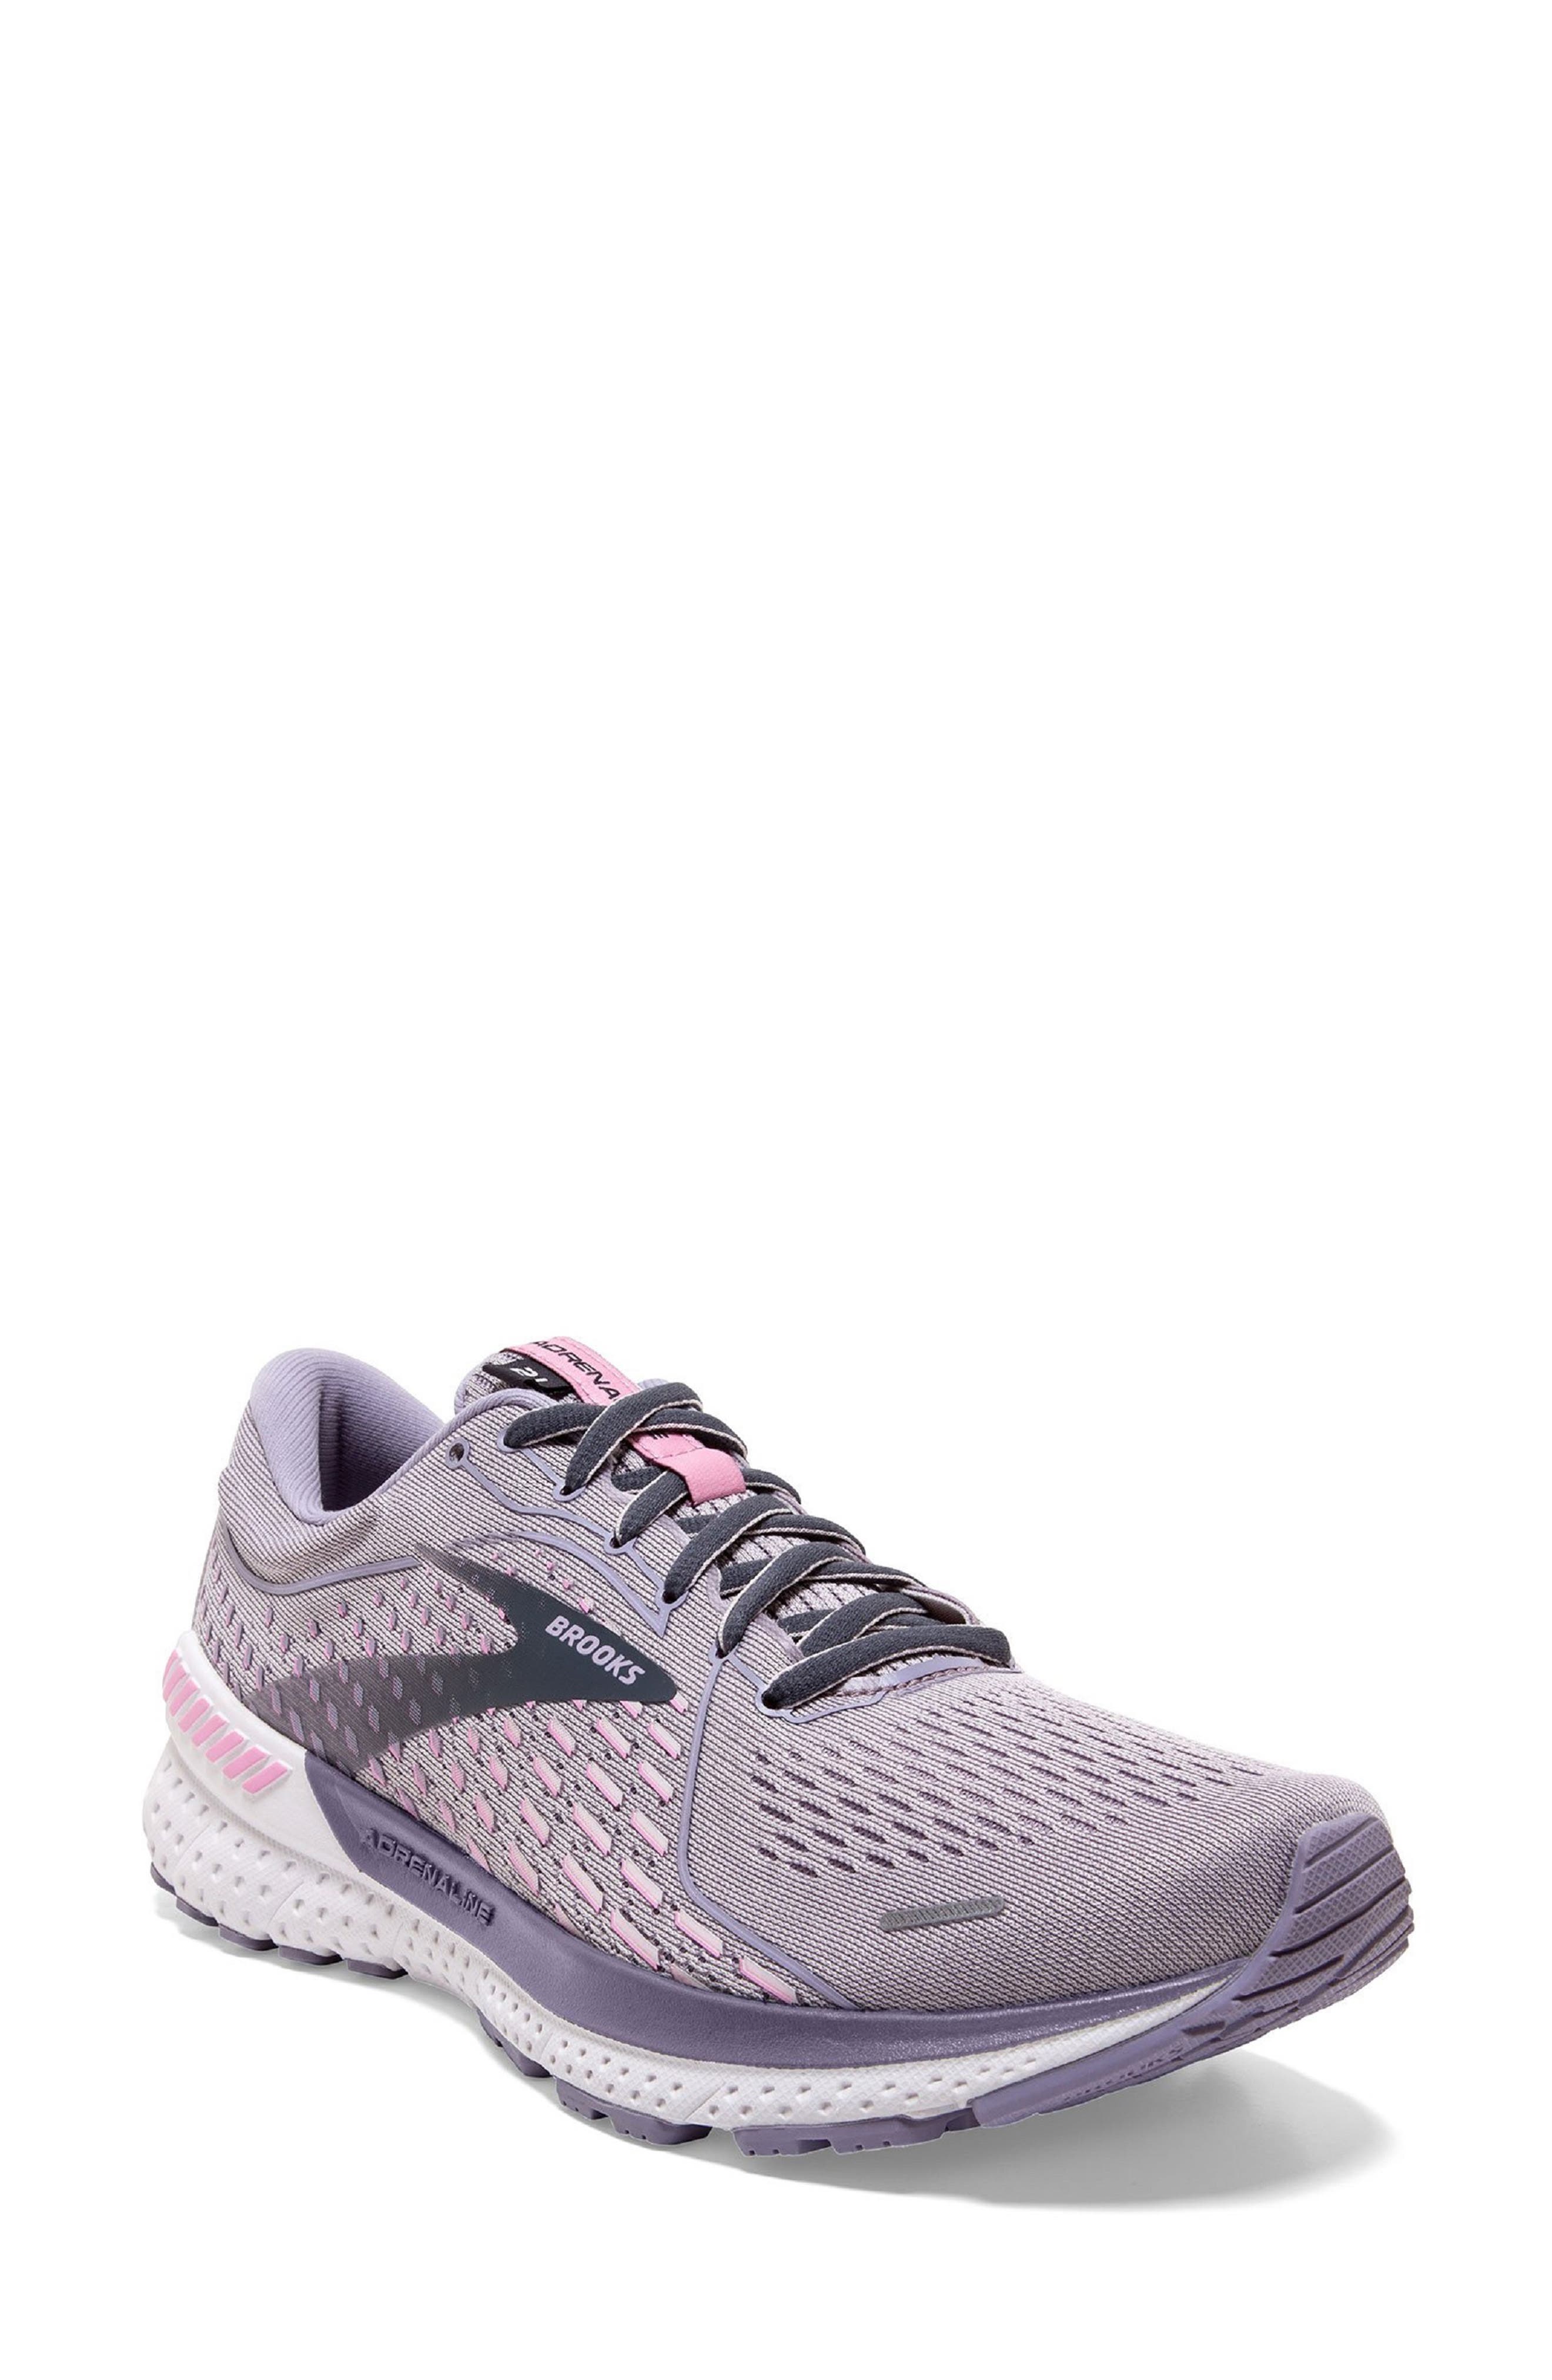 B Brooks Glycerin 12 Womens Runner + Free Aus Delivery 697